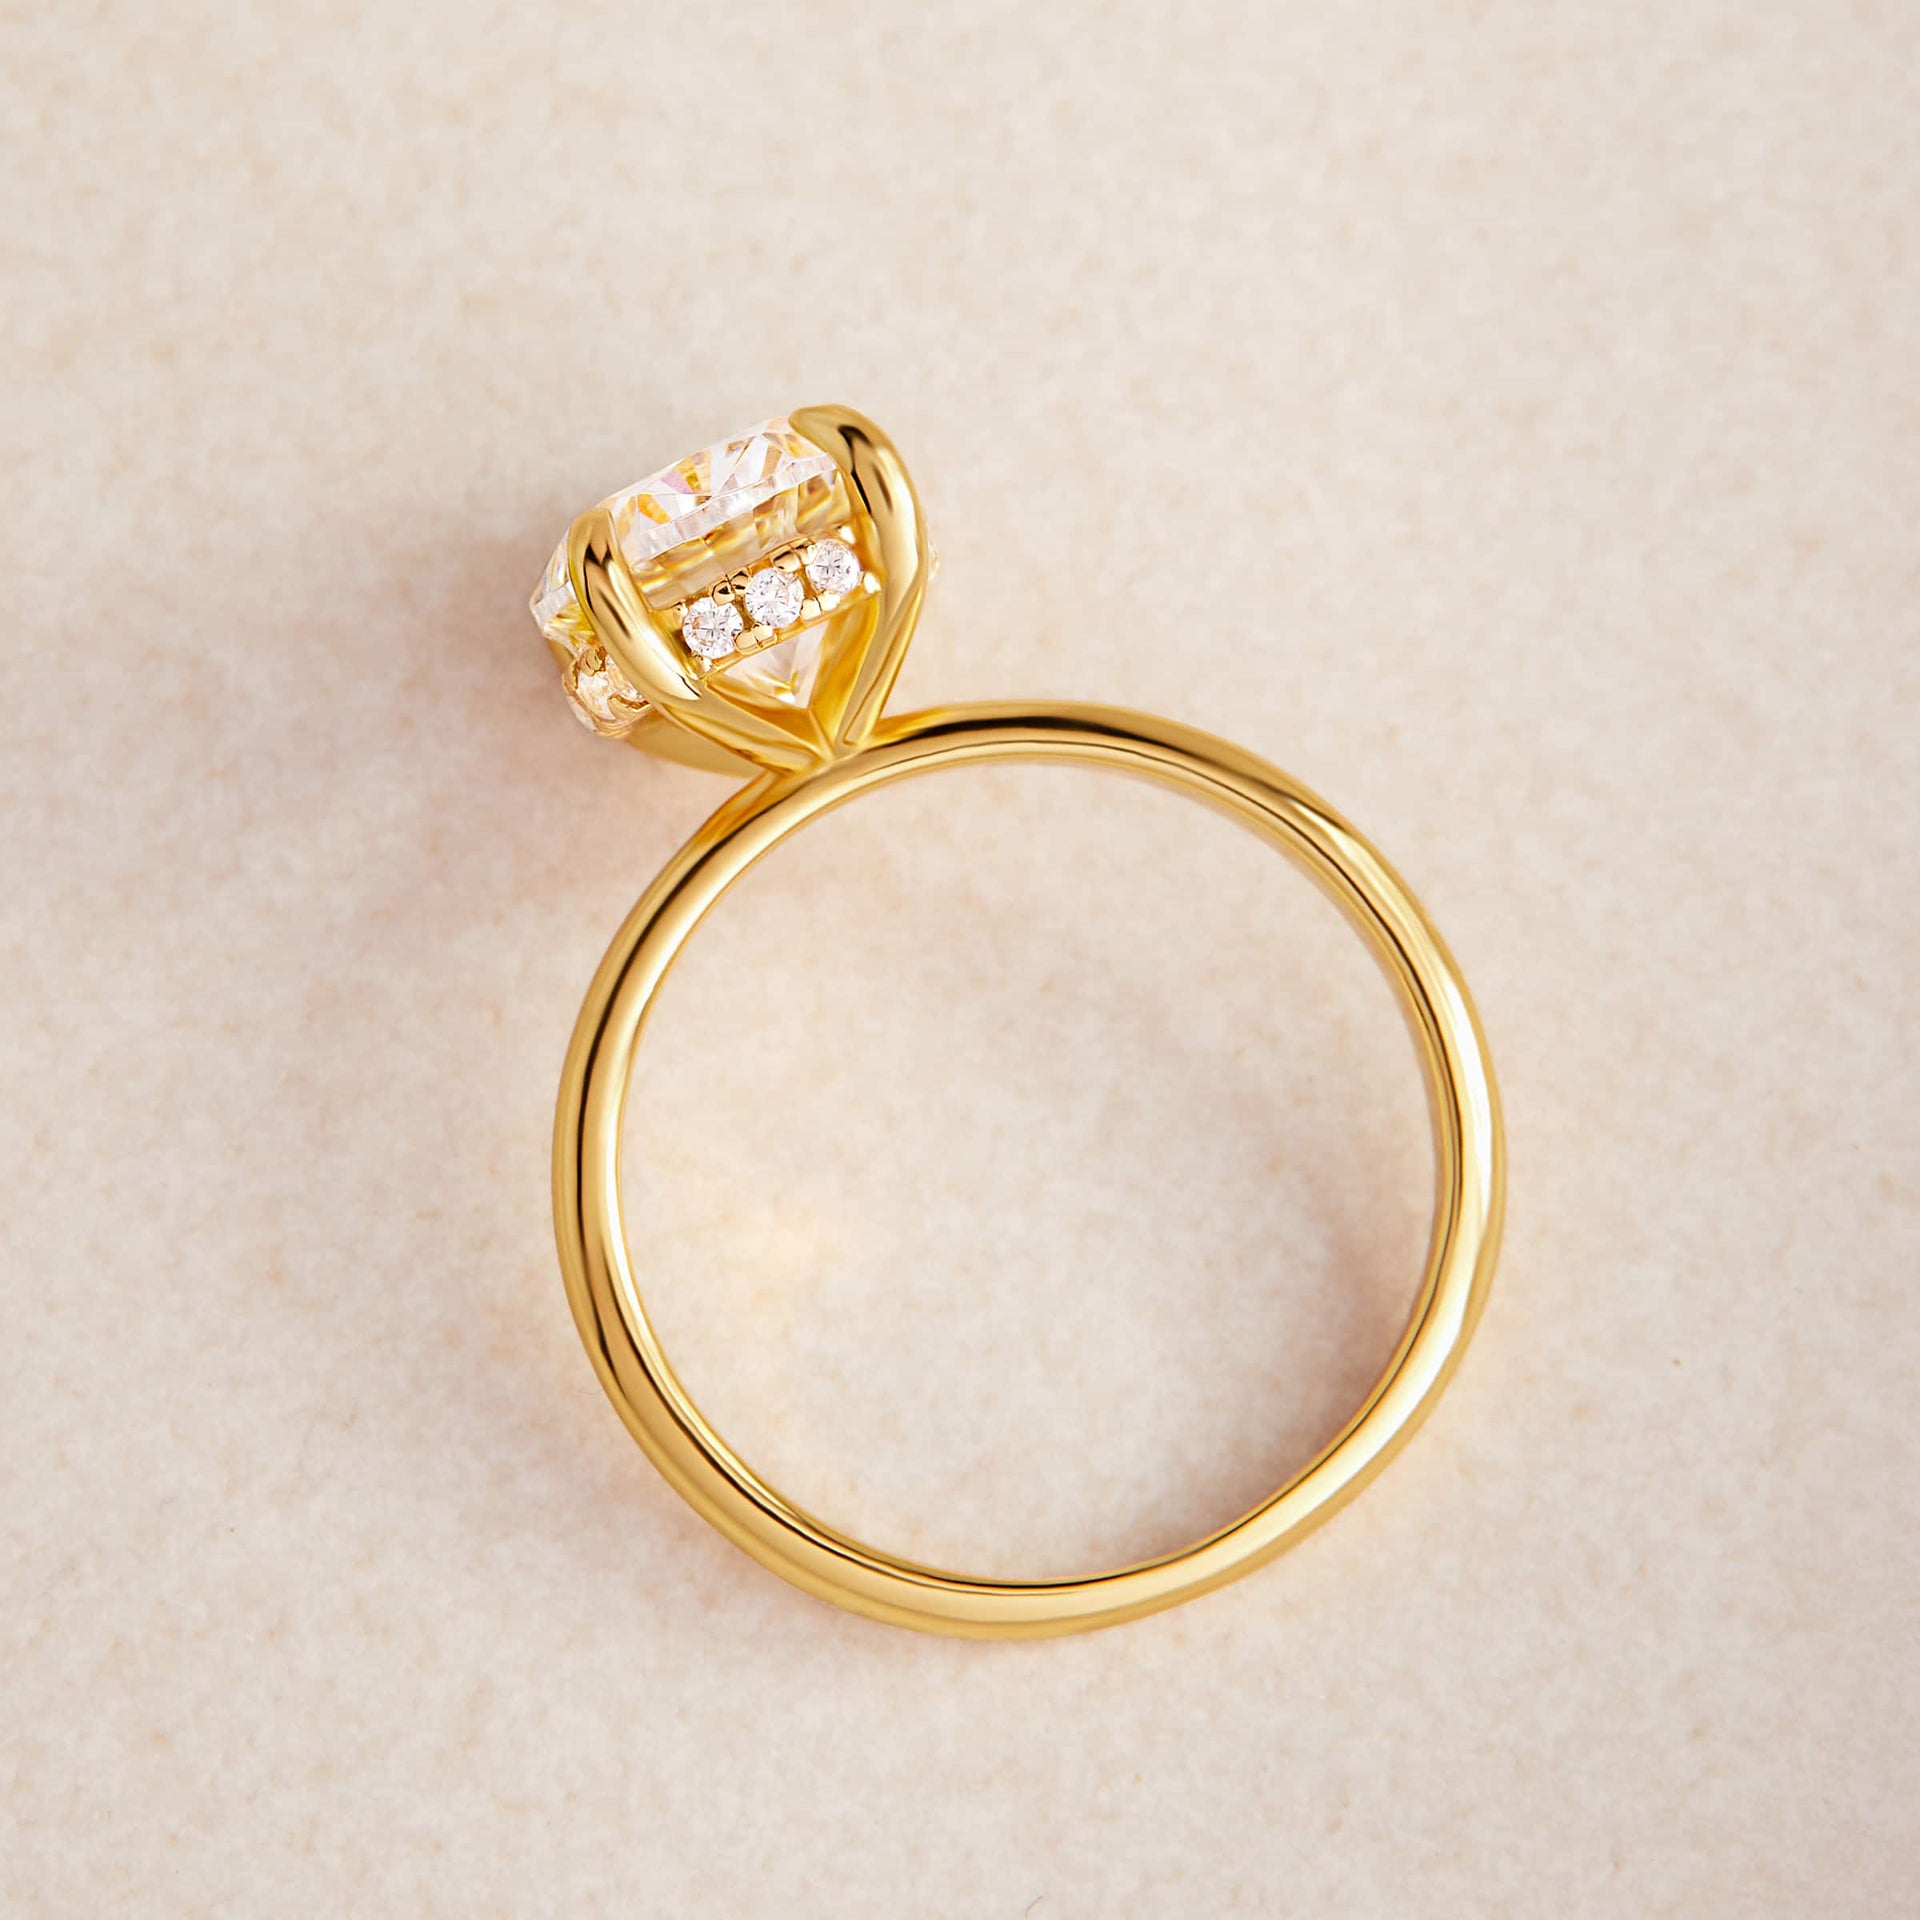 gold solitaire engagement ring with hidden halo